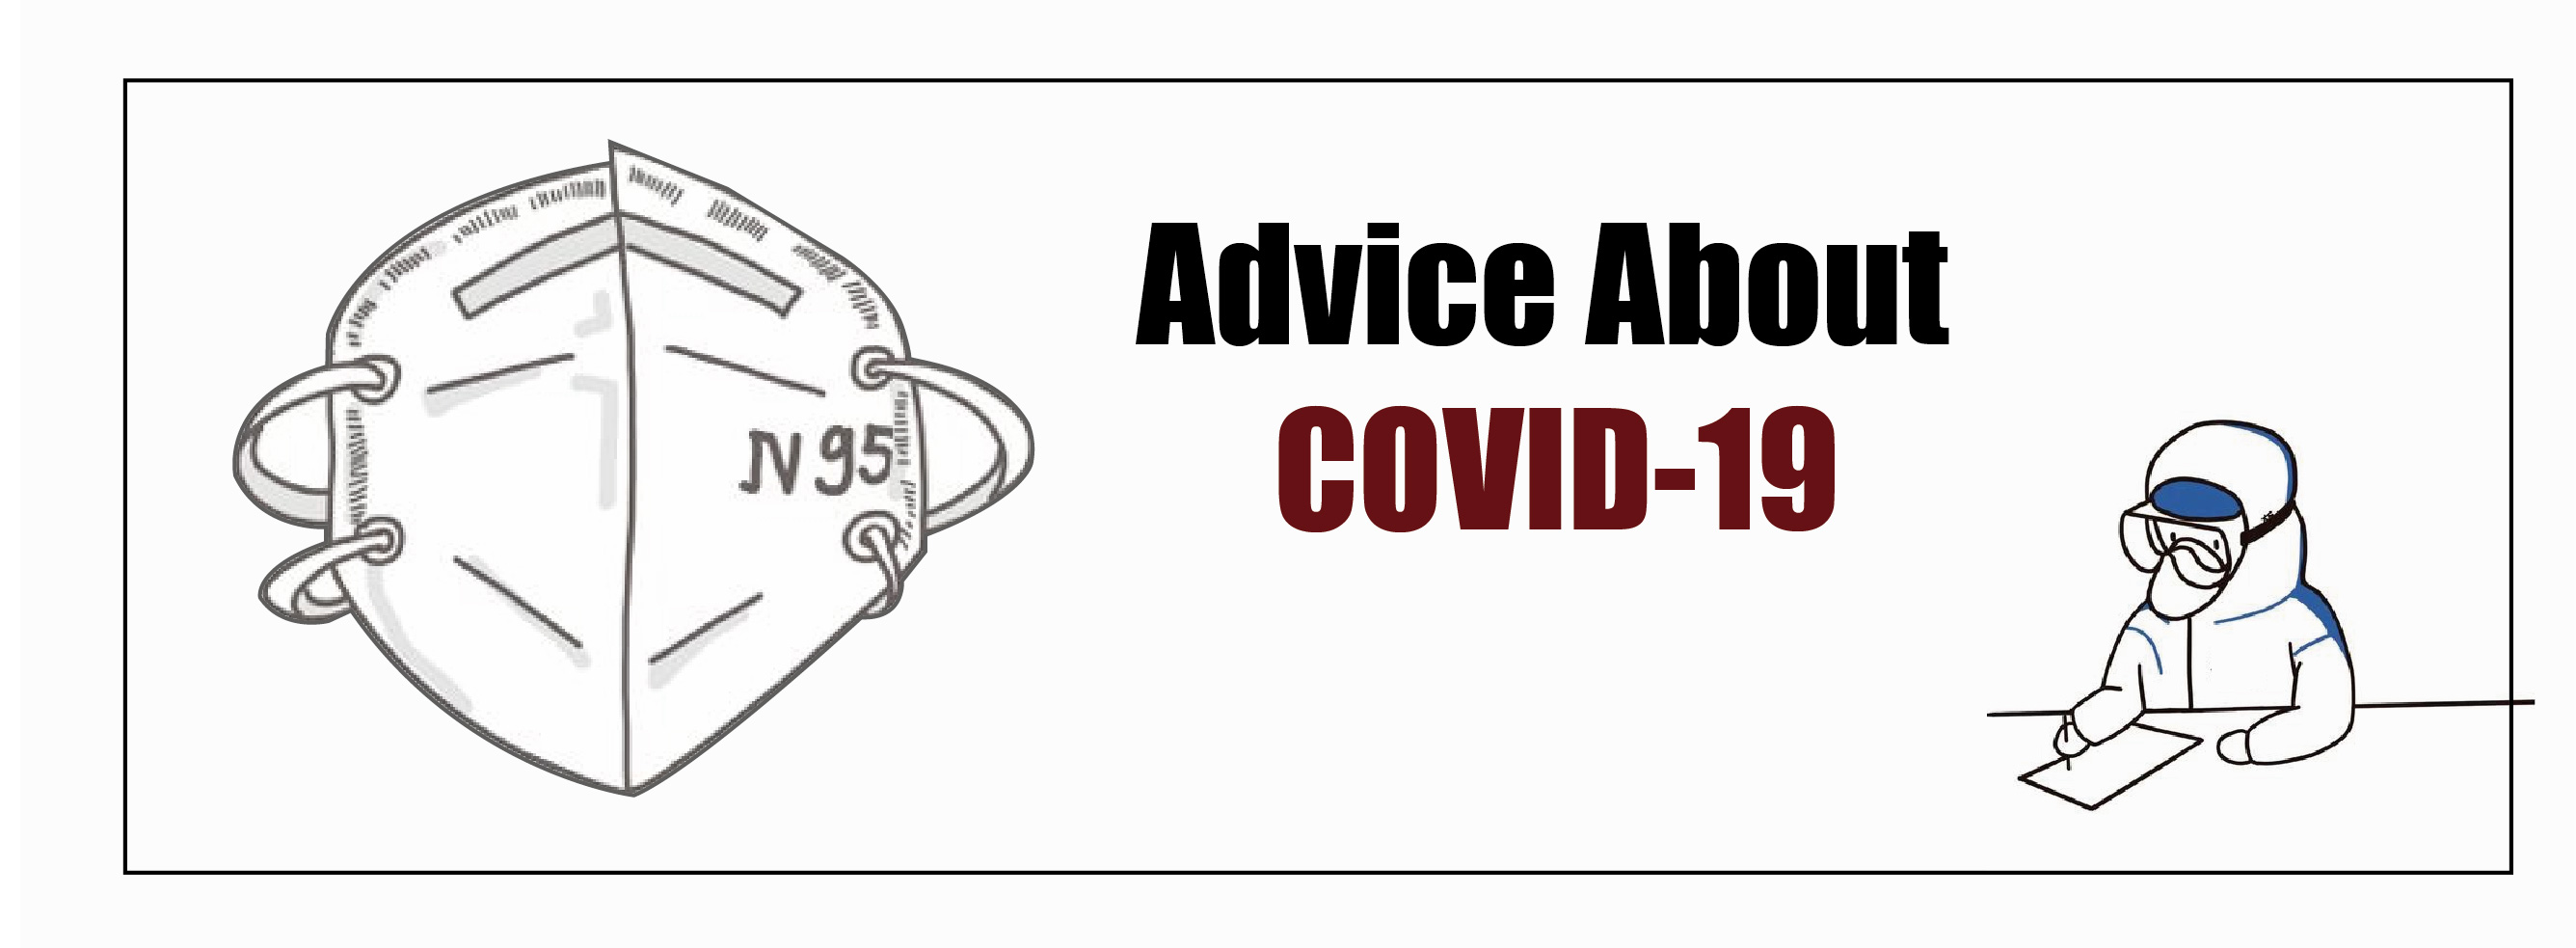 Advice About COVID-19